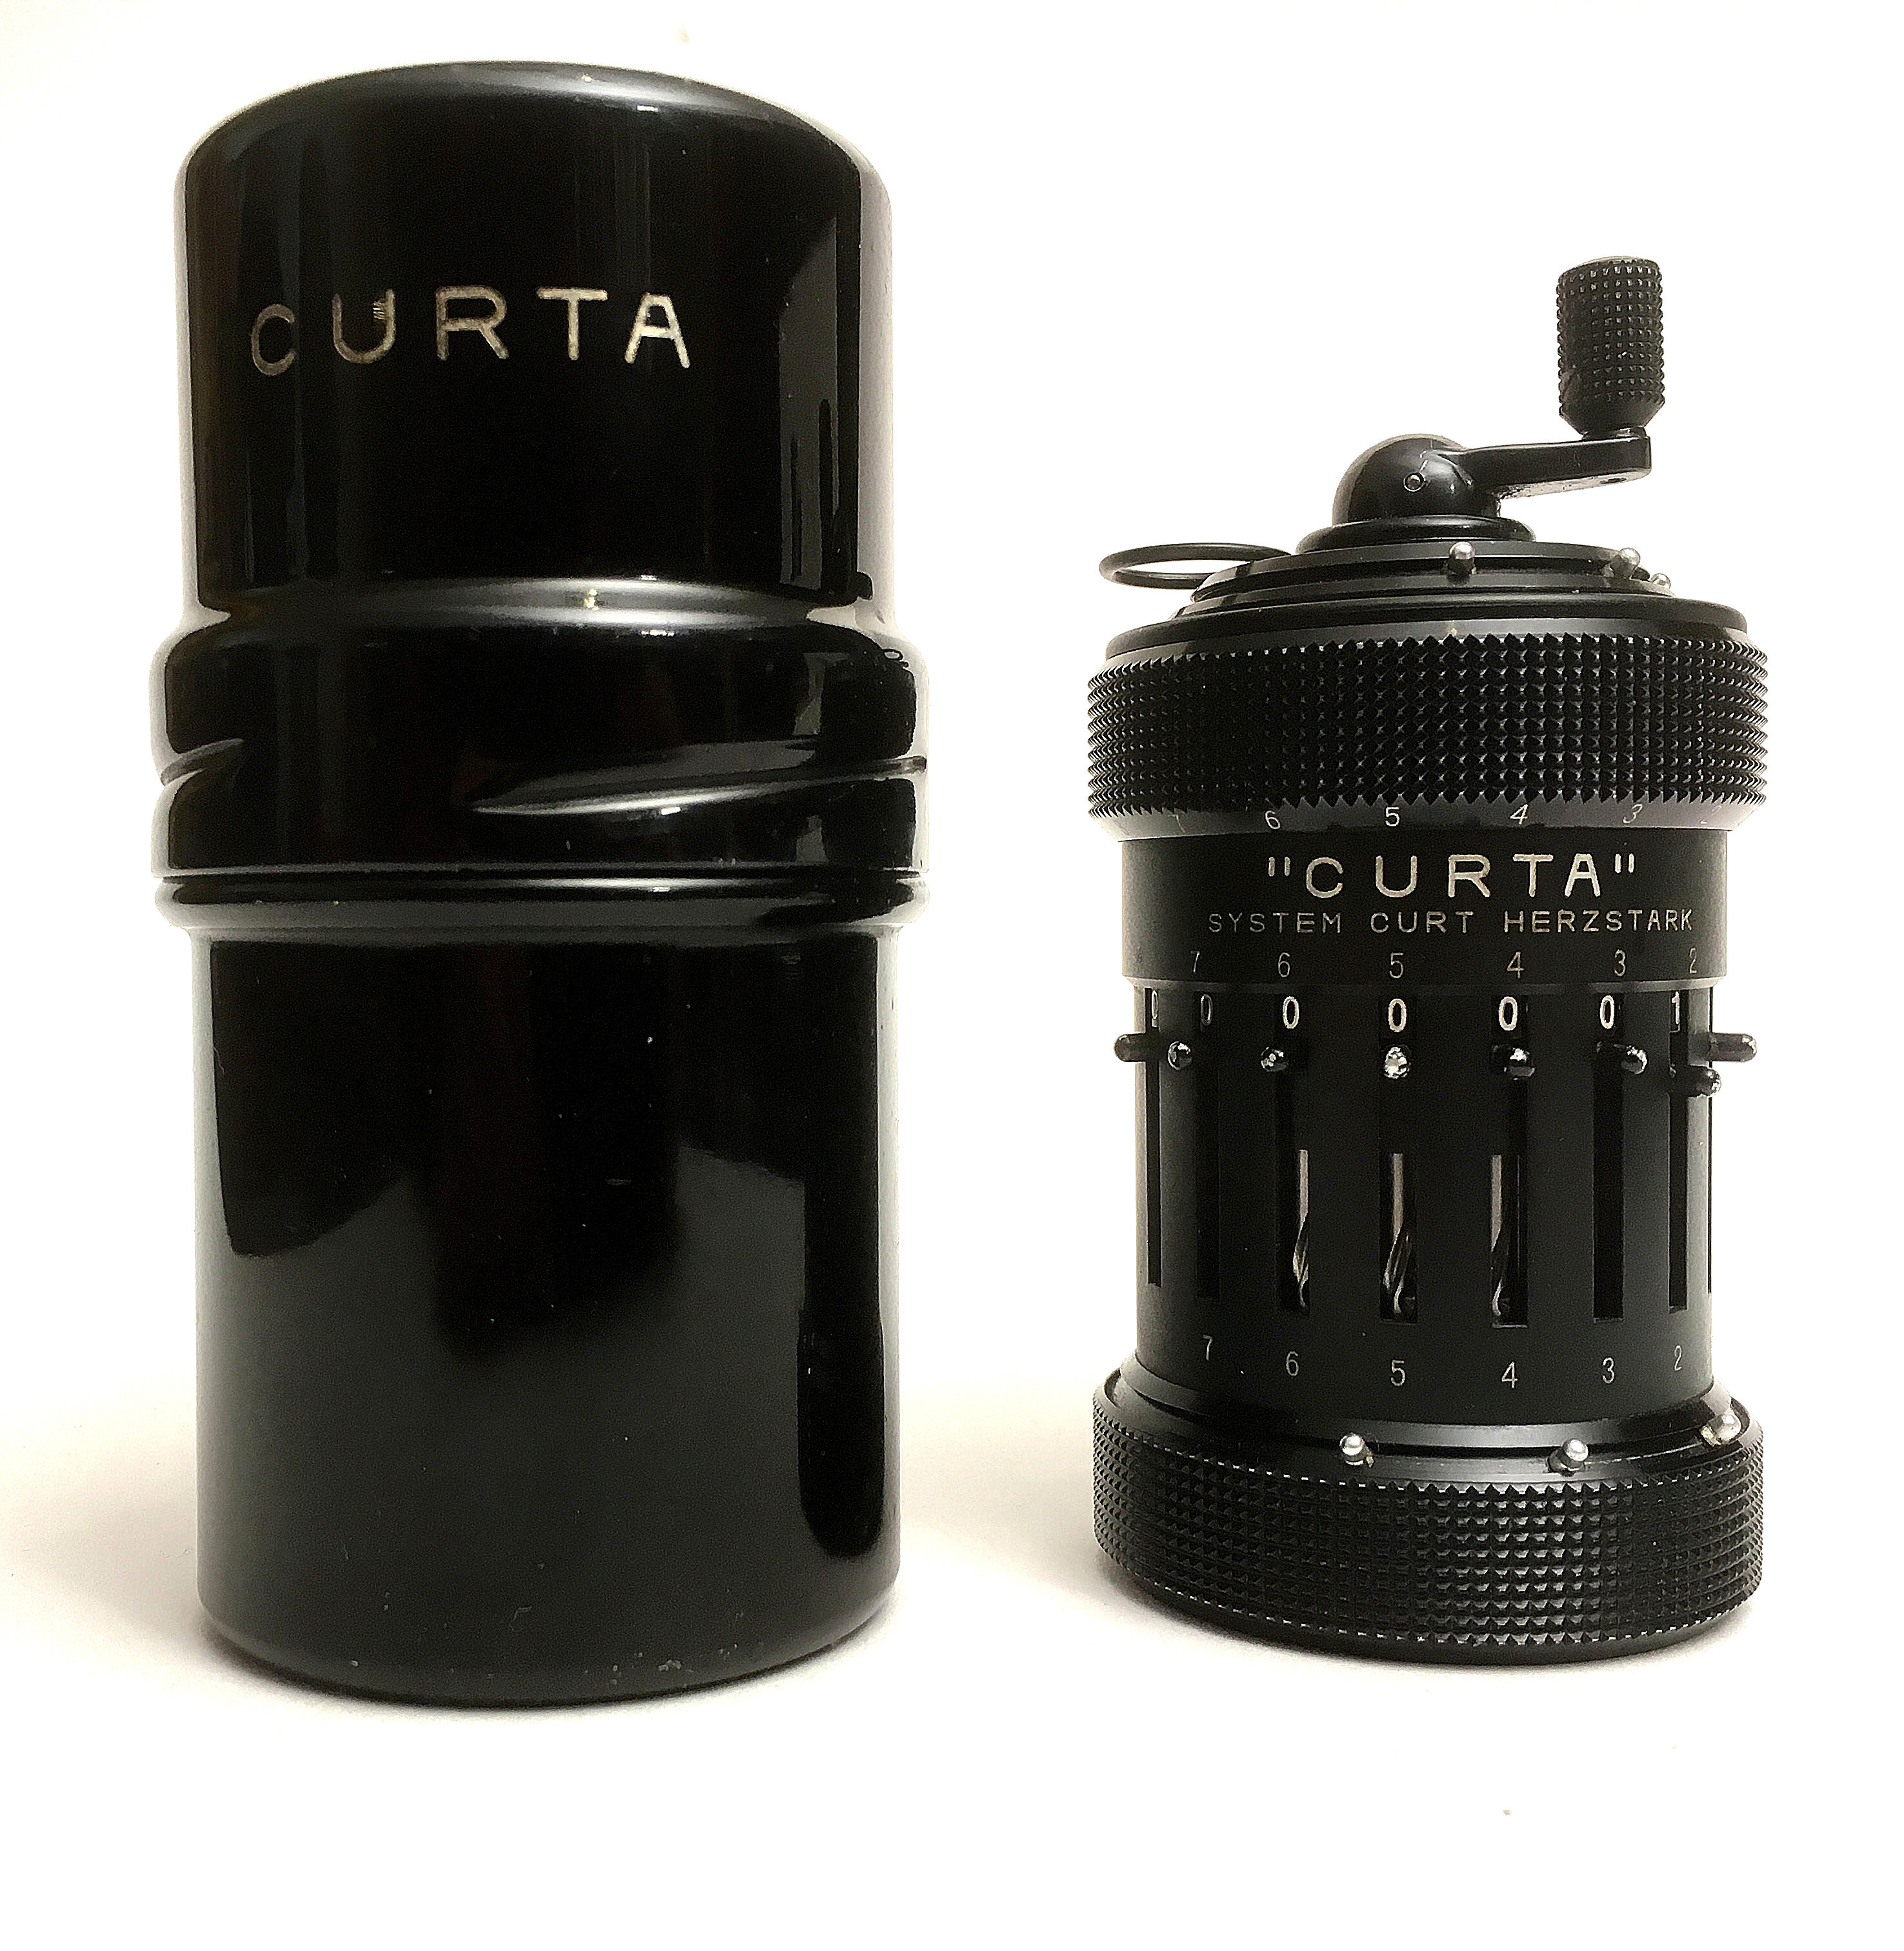 Extremely rare and collectable  one of the oldest known Curta Type 1